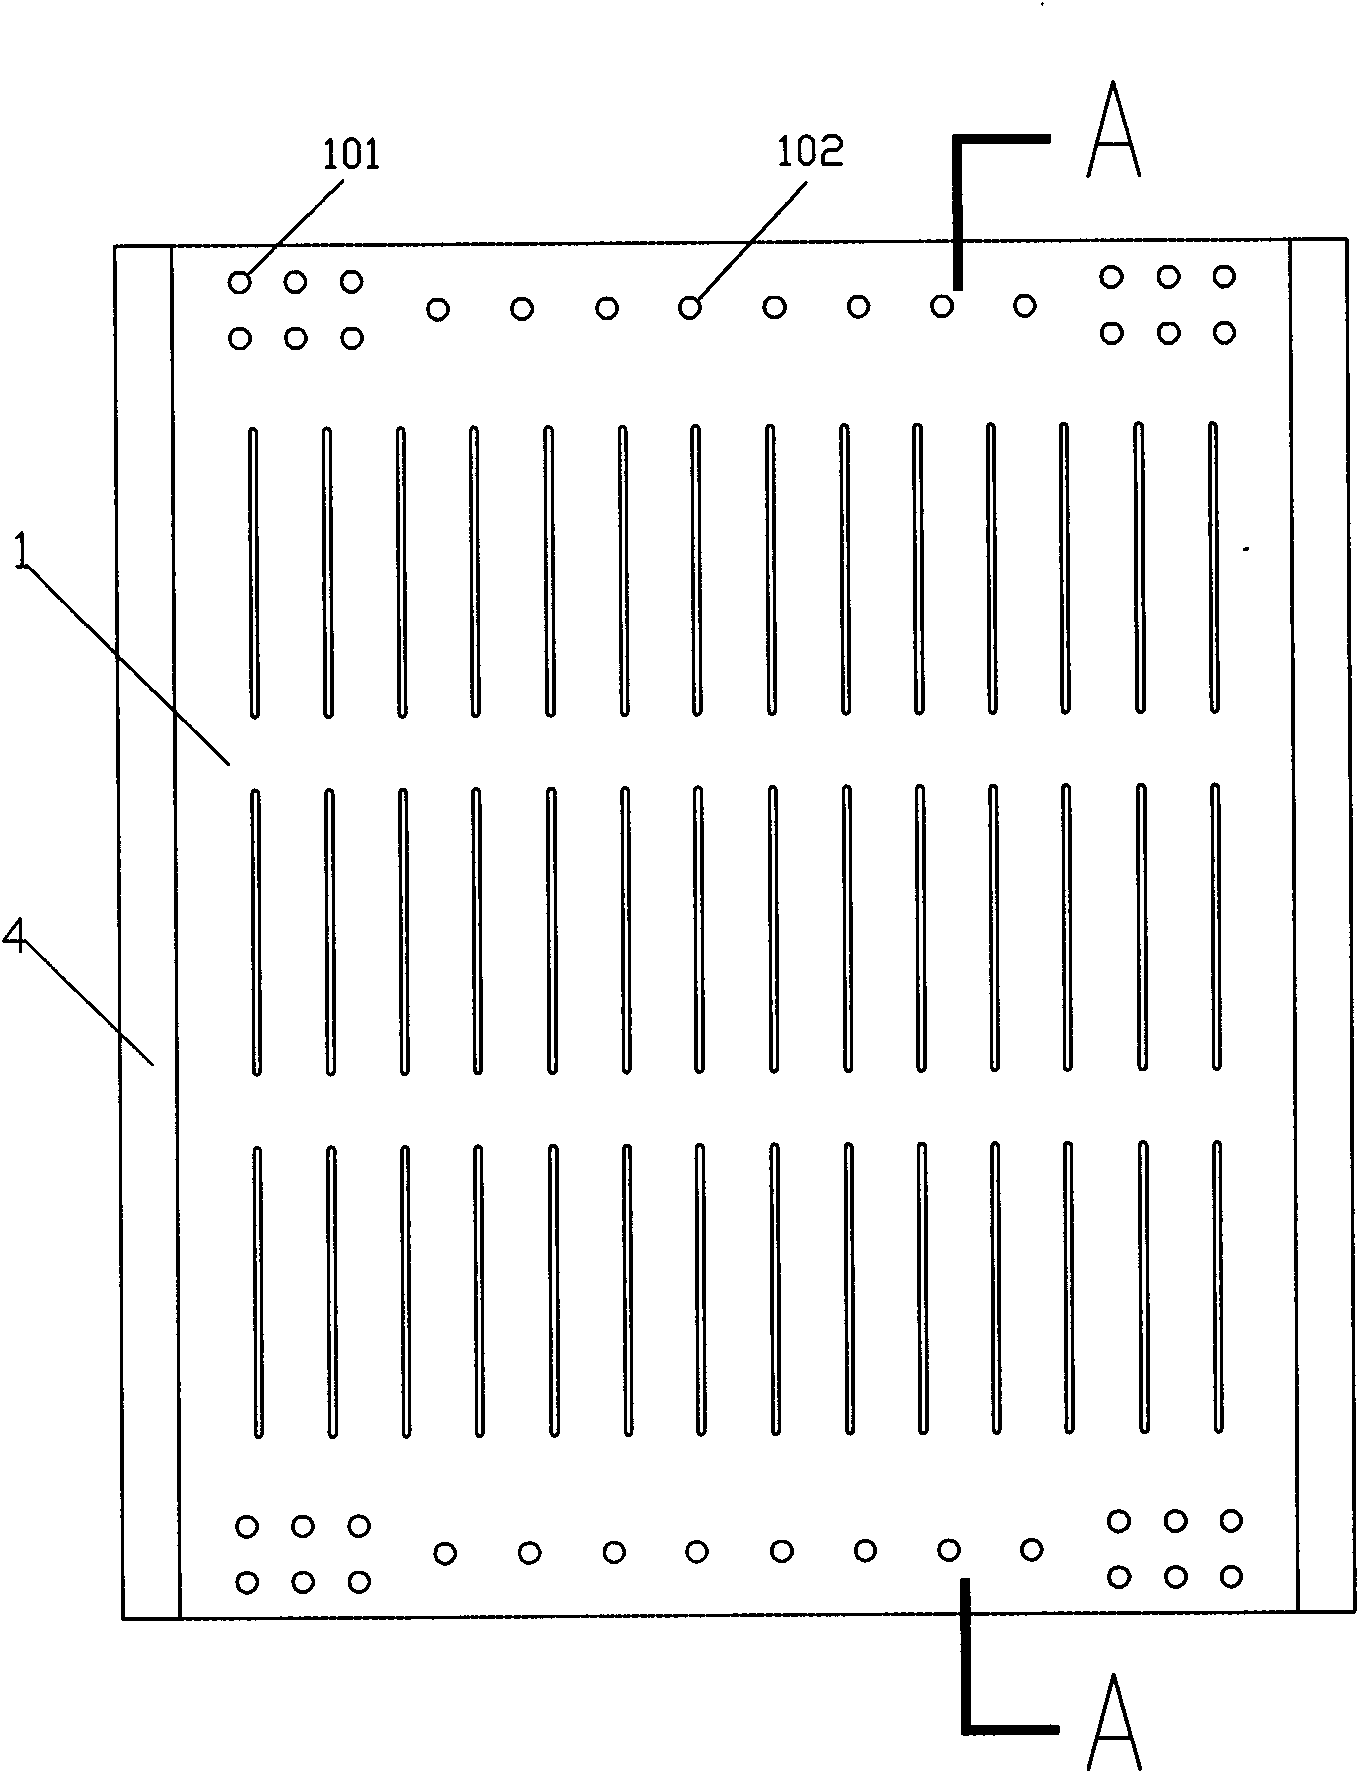 Structure for preventing bolt of steel plate shear wall with slits from slipping